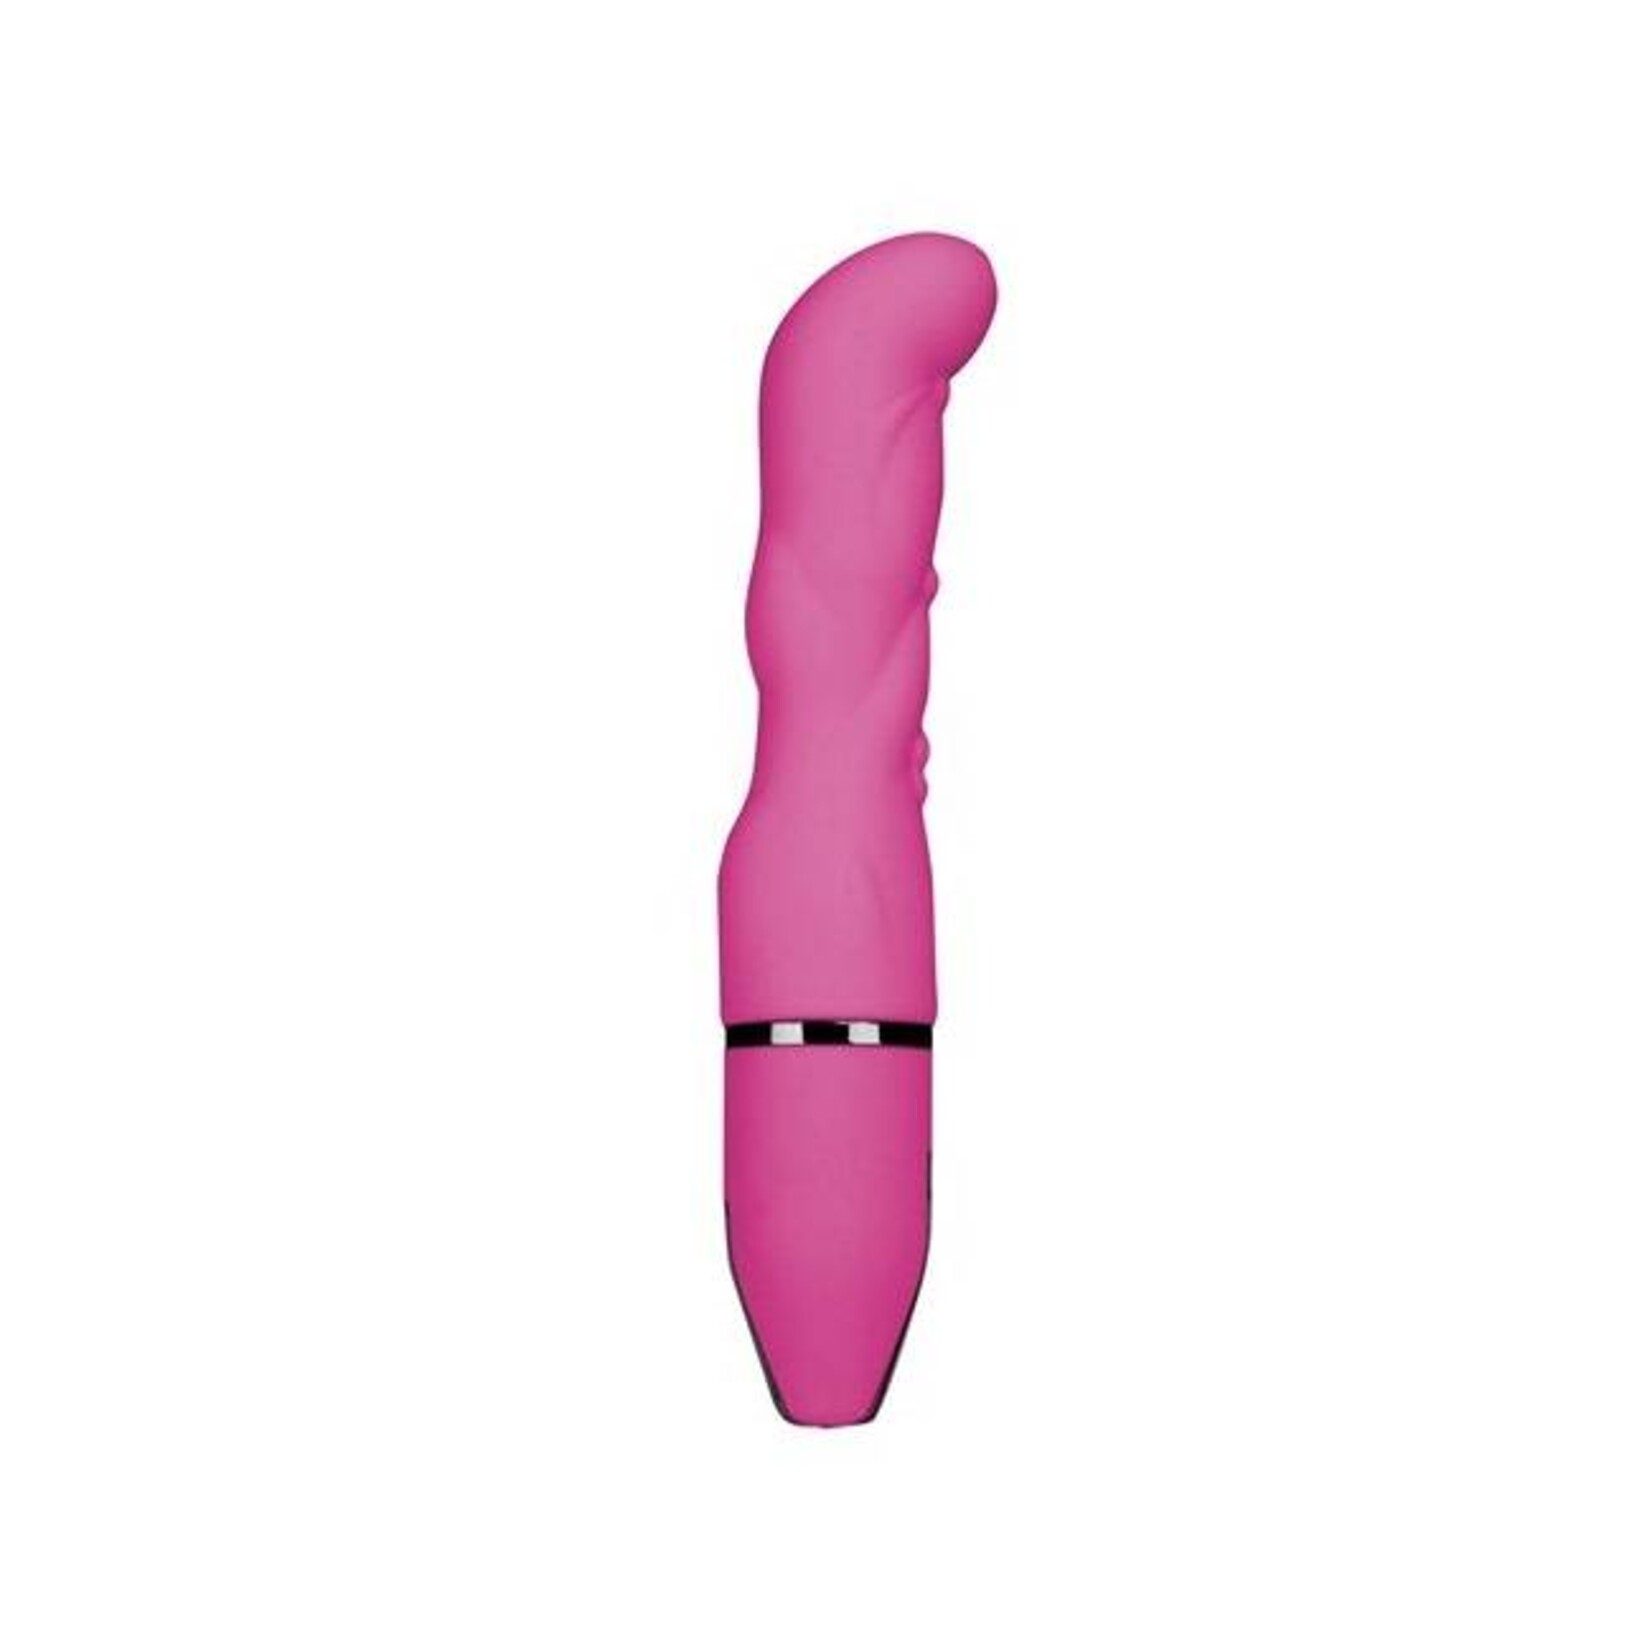 Crazy Performer 6" Waterproof Silicone Vibrator